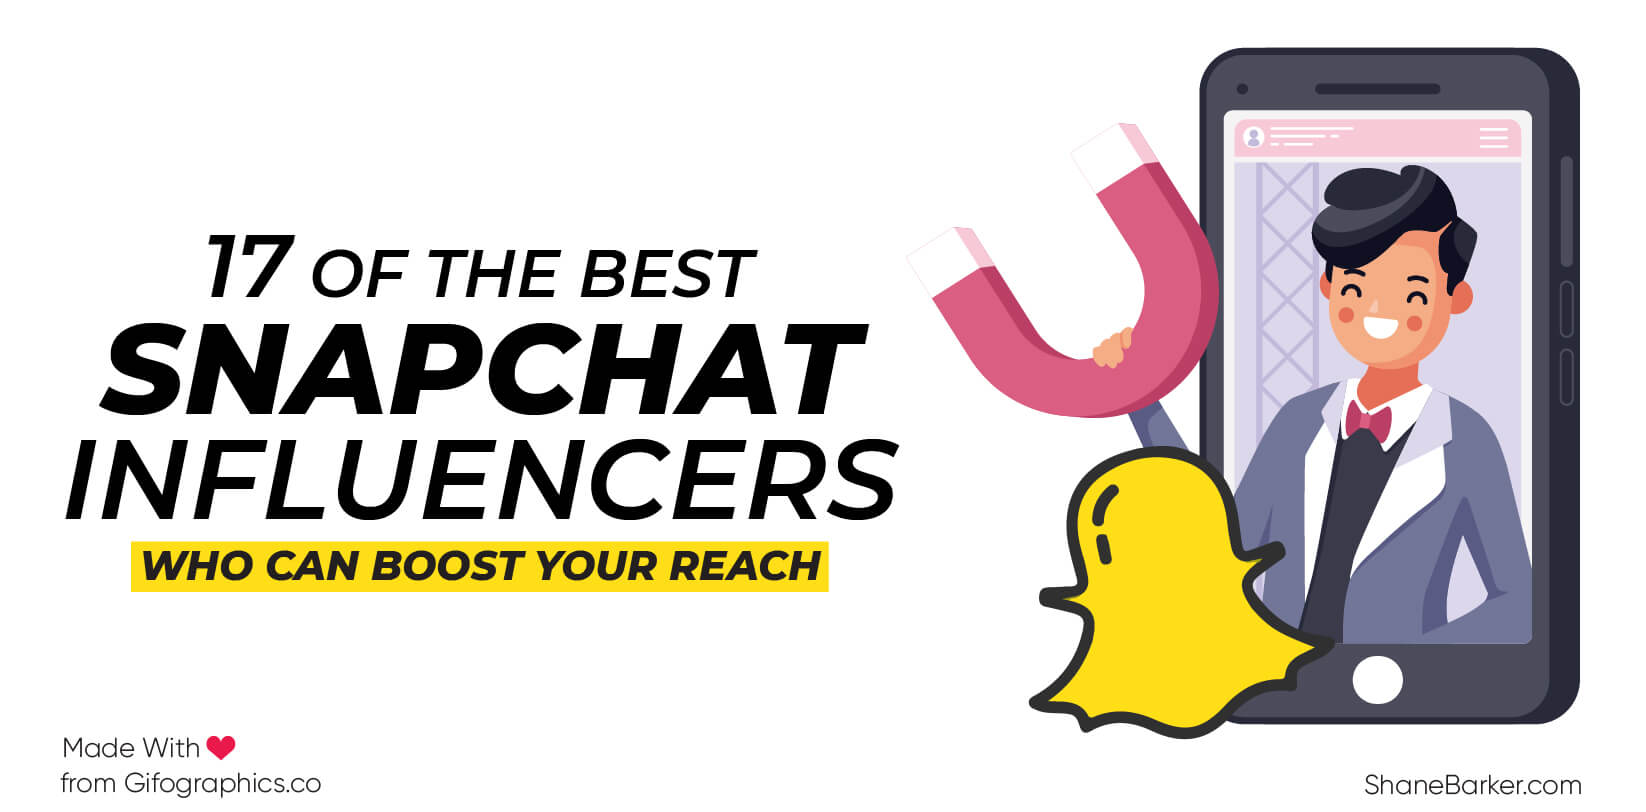 17 of the Best Snapchat Influencers Who Can Boost Your Reach